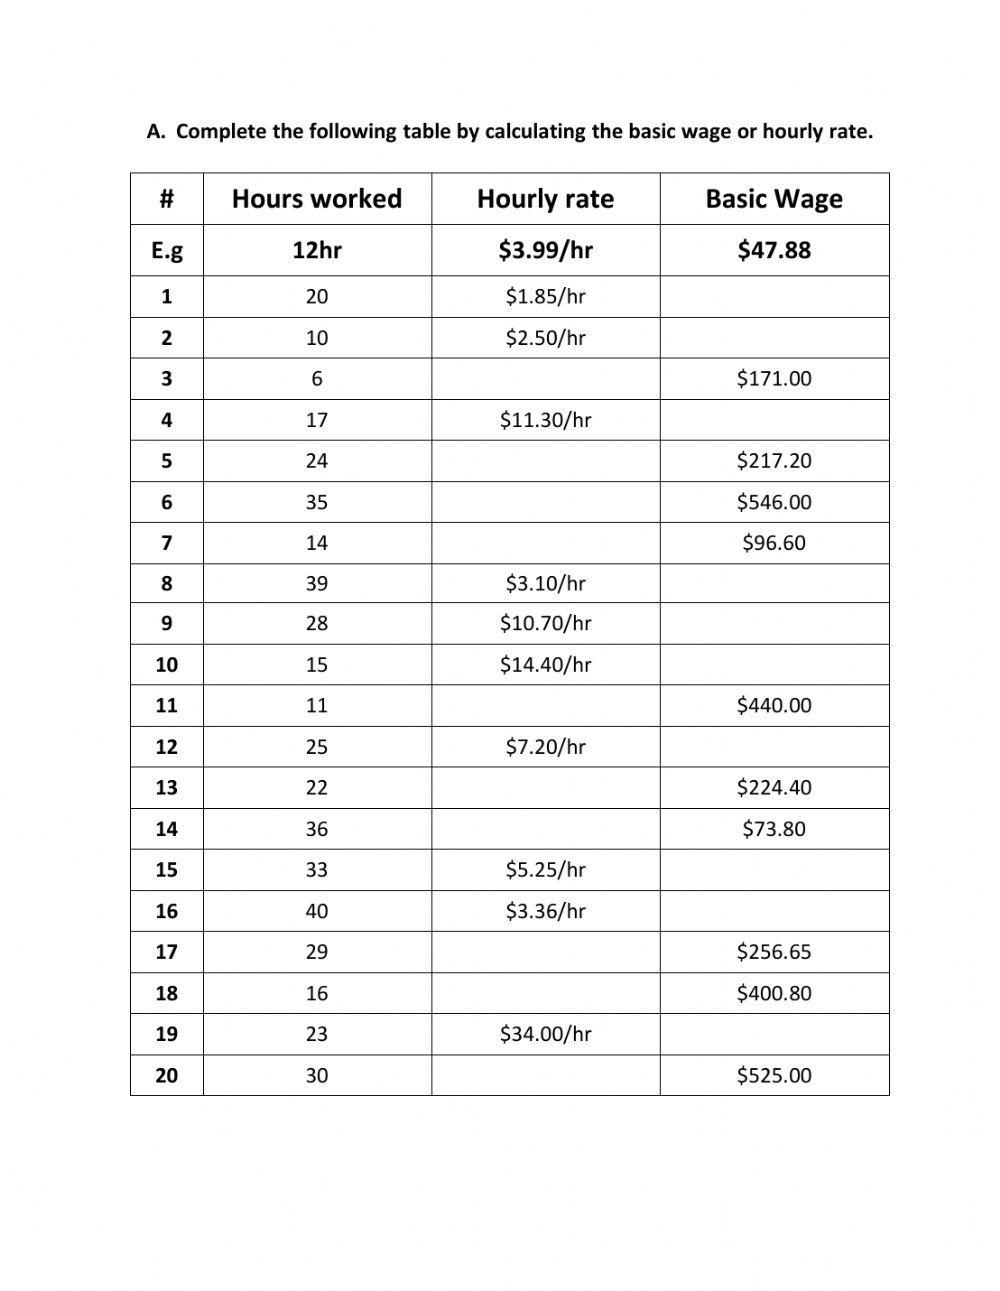 Calculating Basic Wage and Hourly Rate